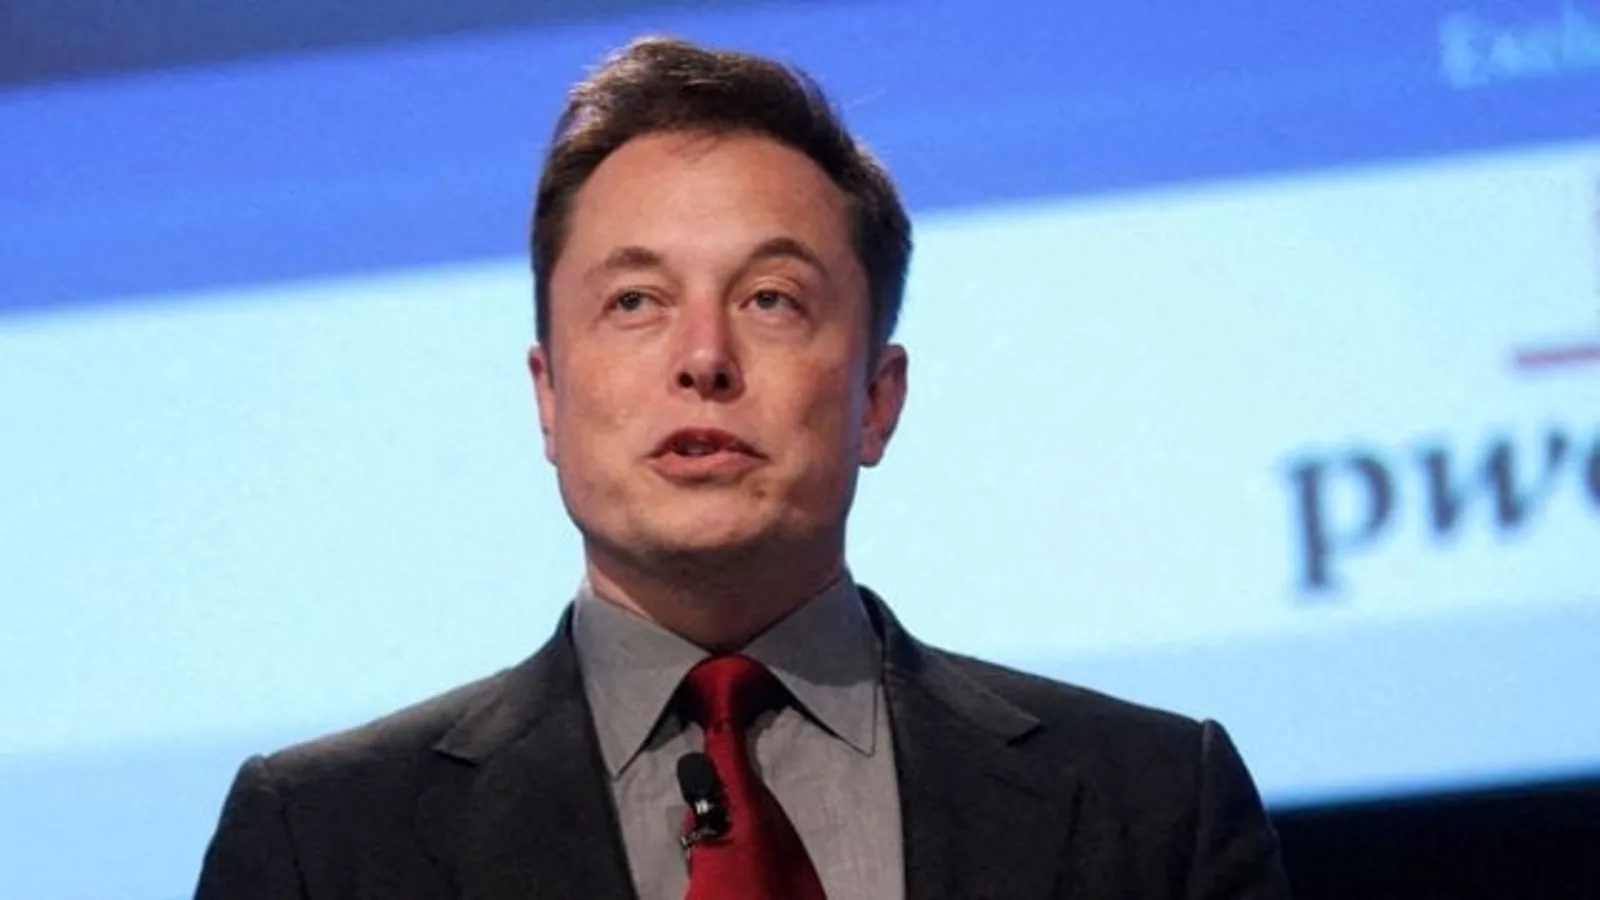 Elon Musk-Twitter deal: A look at some key numbers